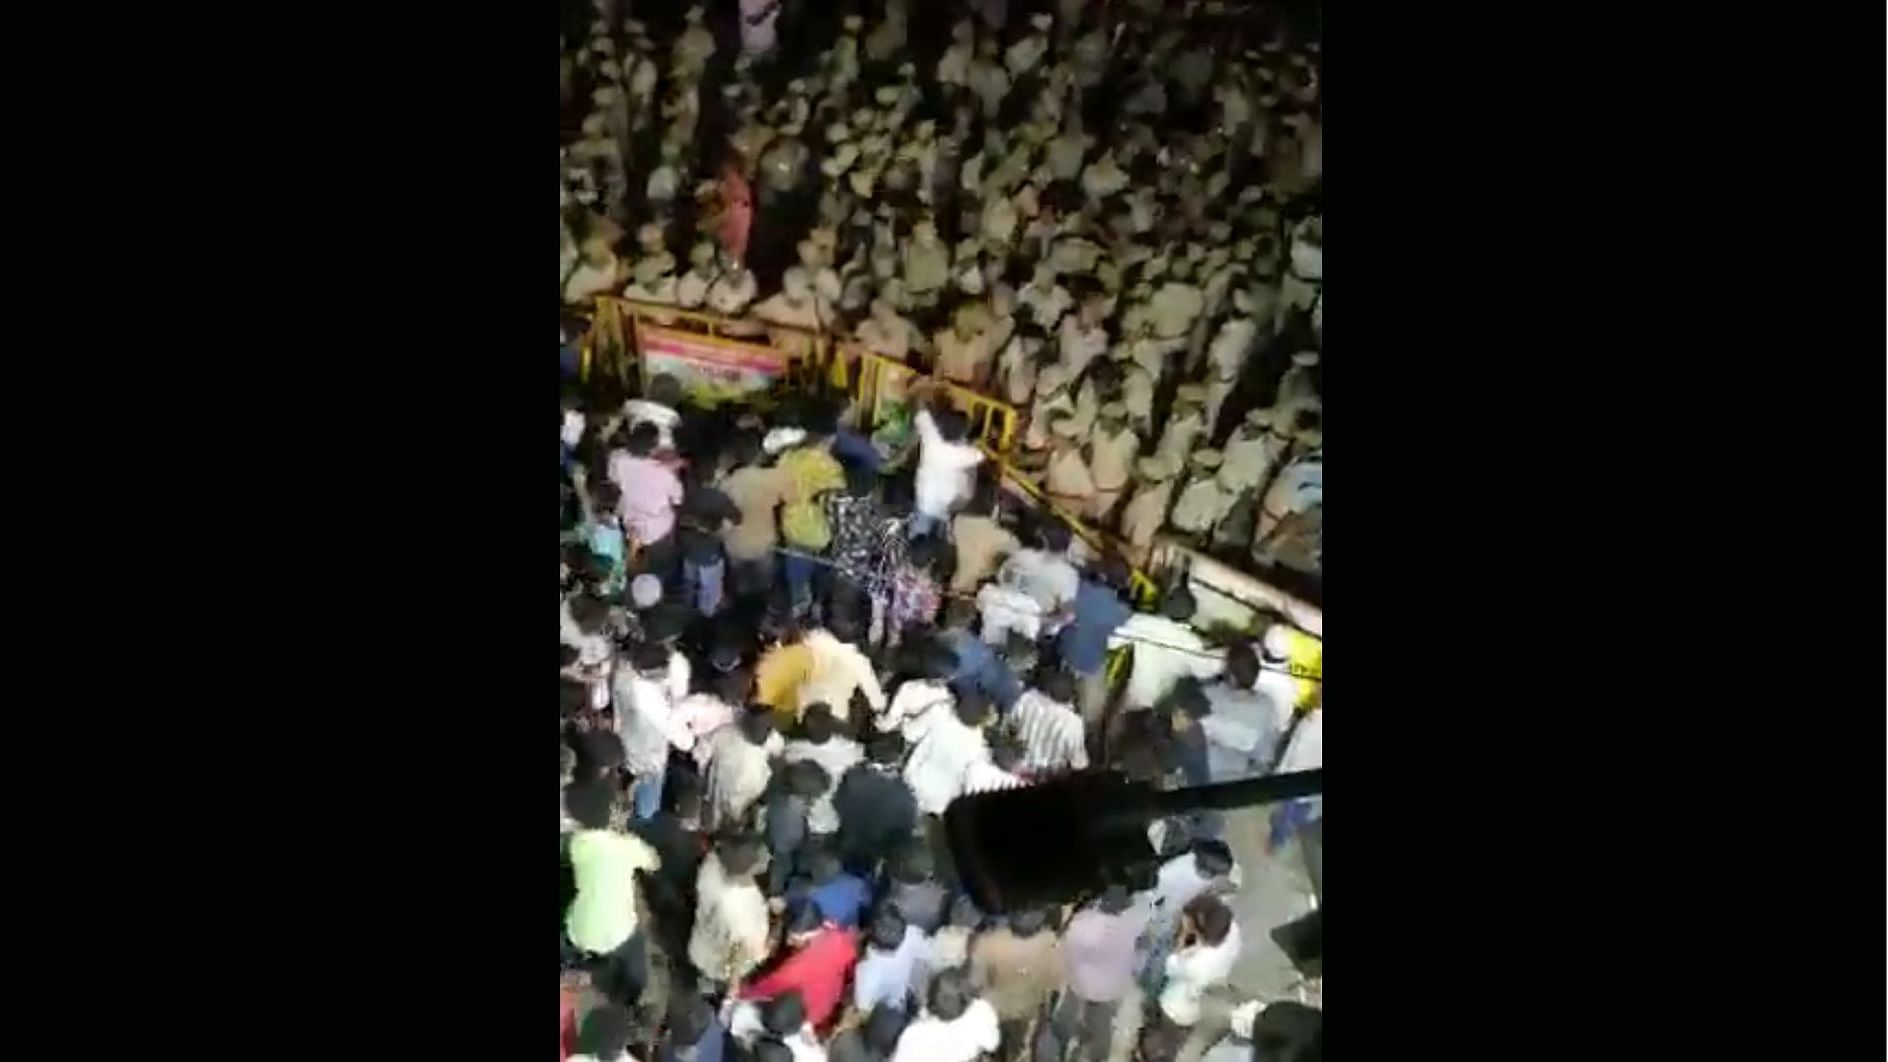 Multiple protests broke out in parts of Chennai on Friday, 14 February night, after police lathi-charged and detained anti-CAA protesters from the city’s Old Washermanpet area.